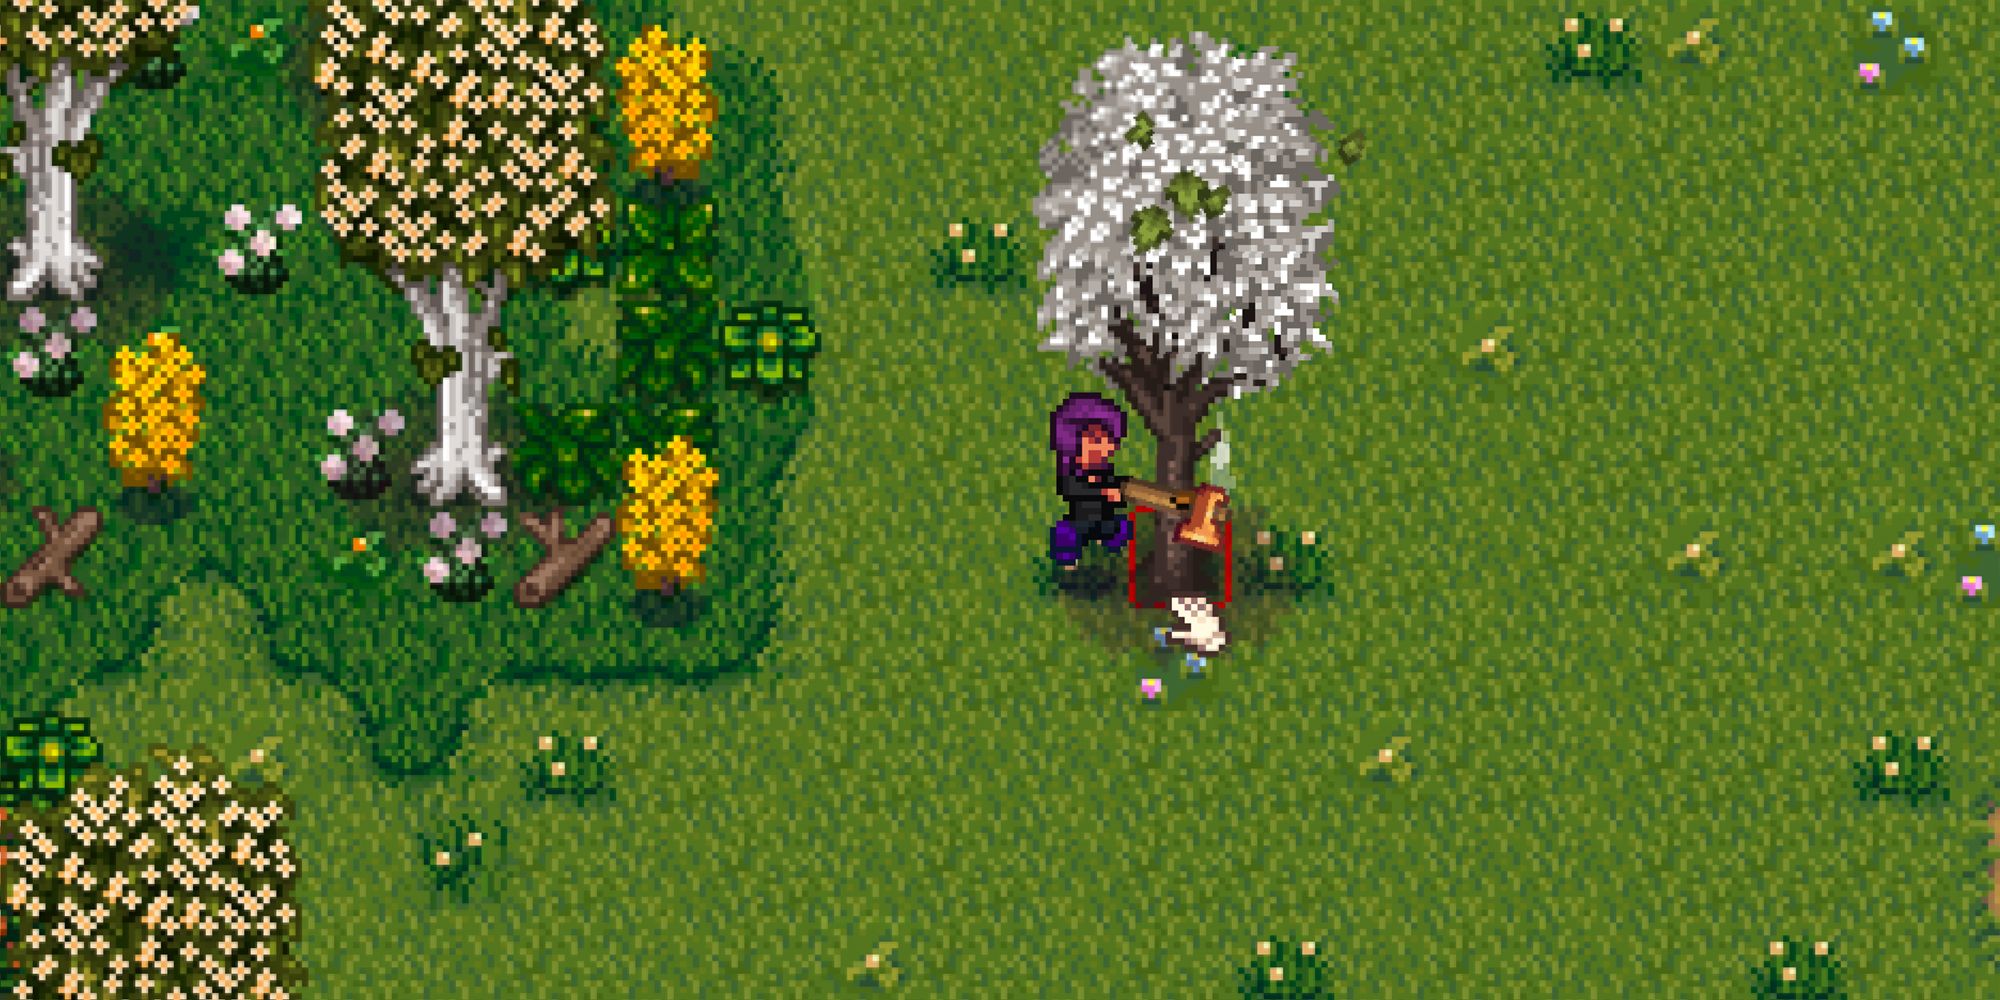 Stardew Valley farmer using axe to cut down a tree